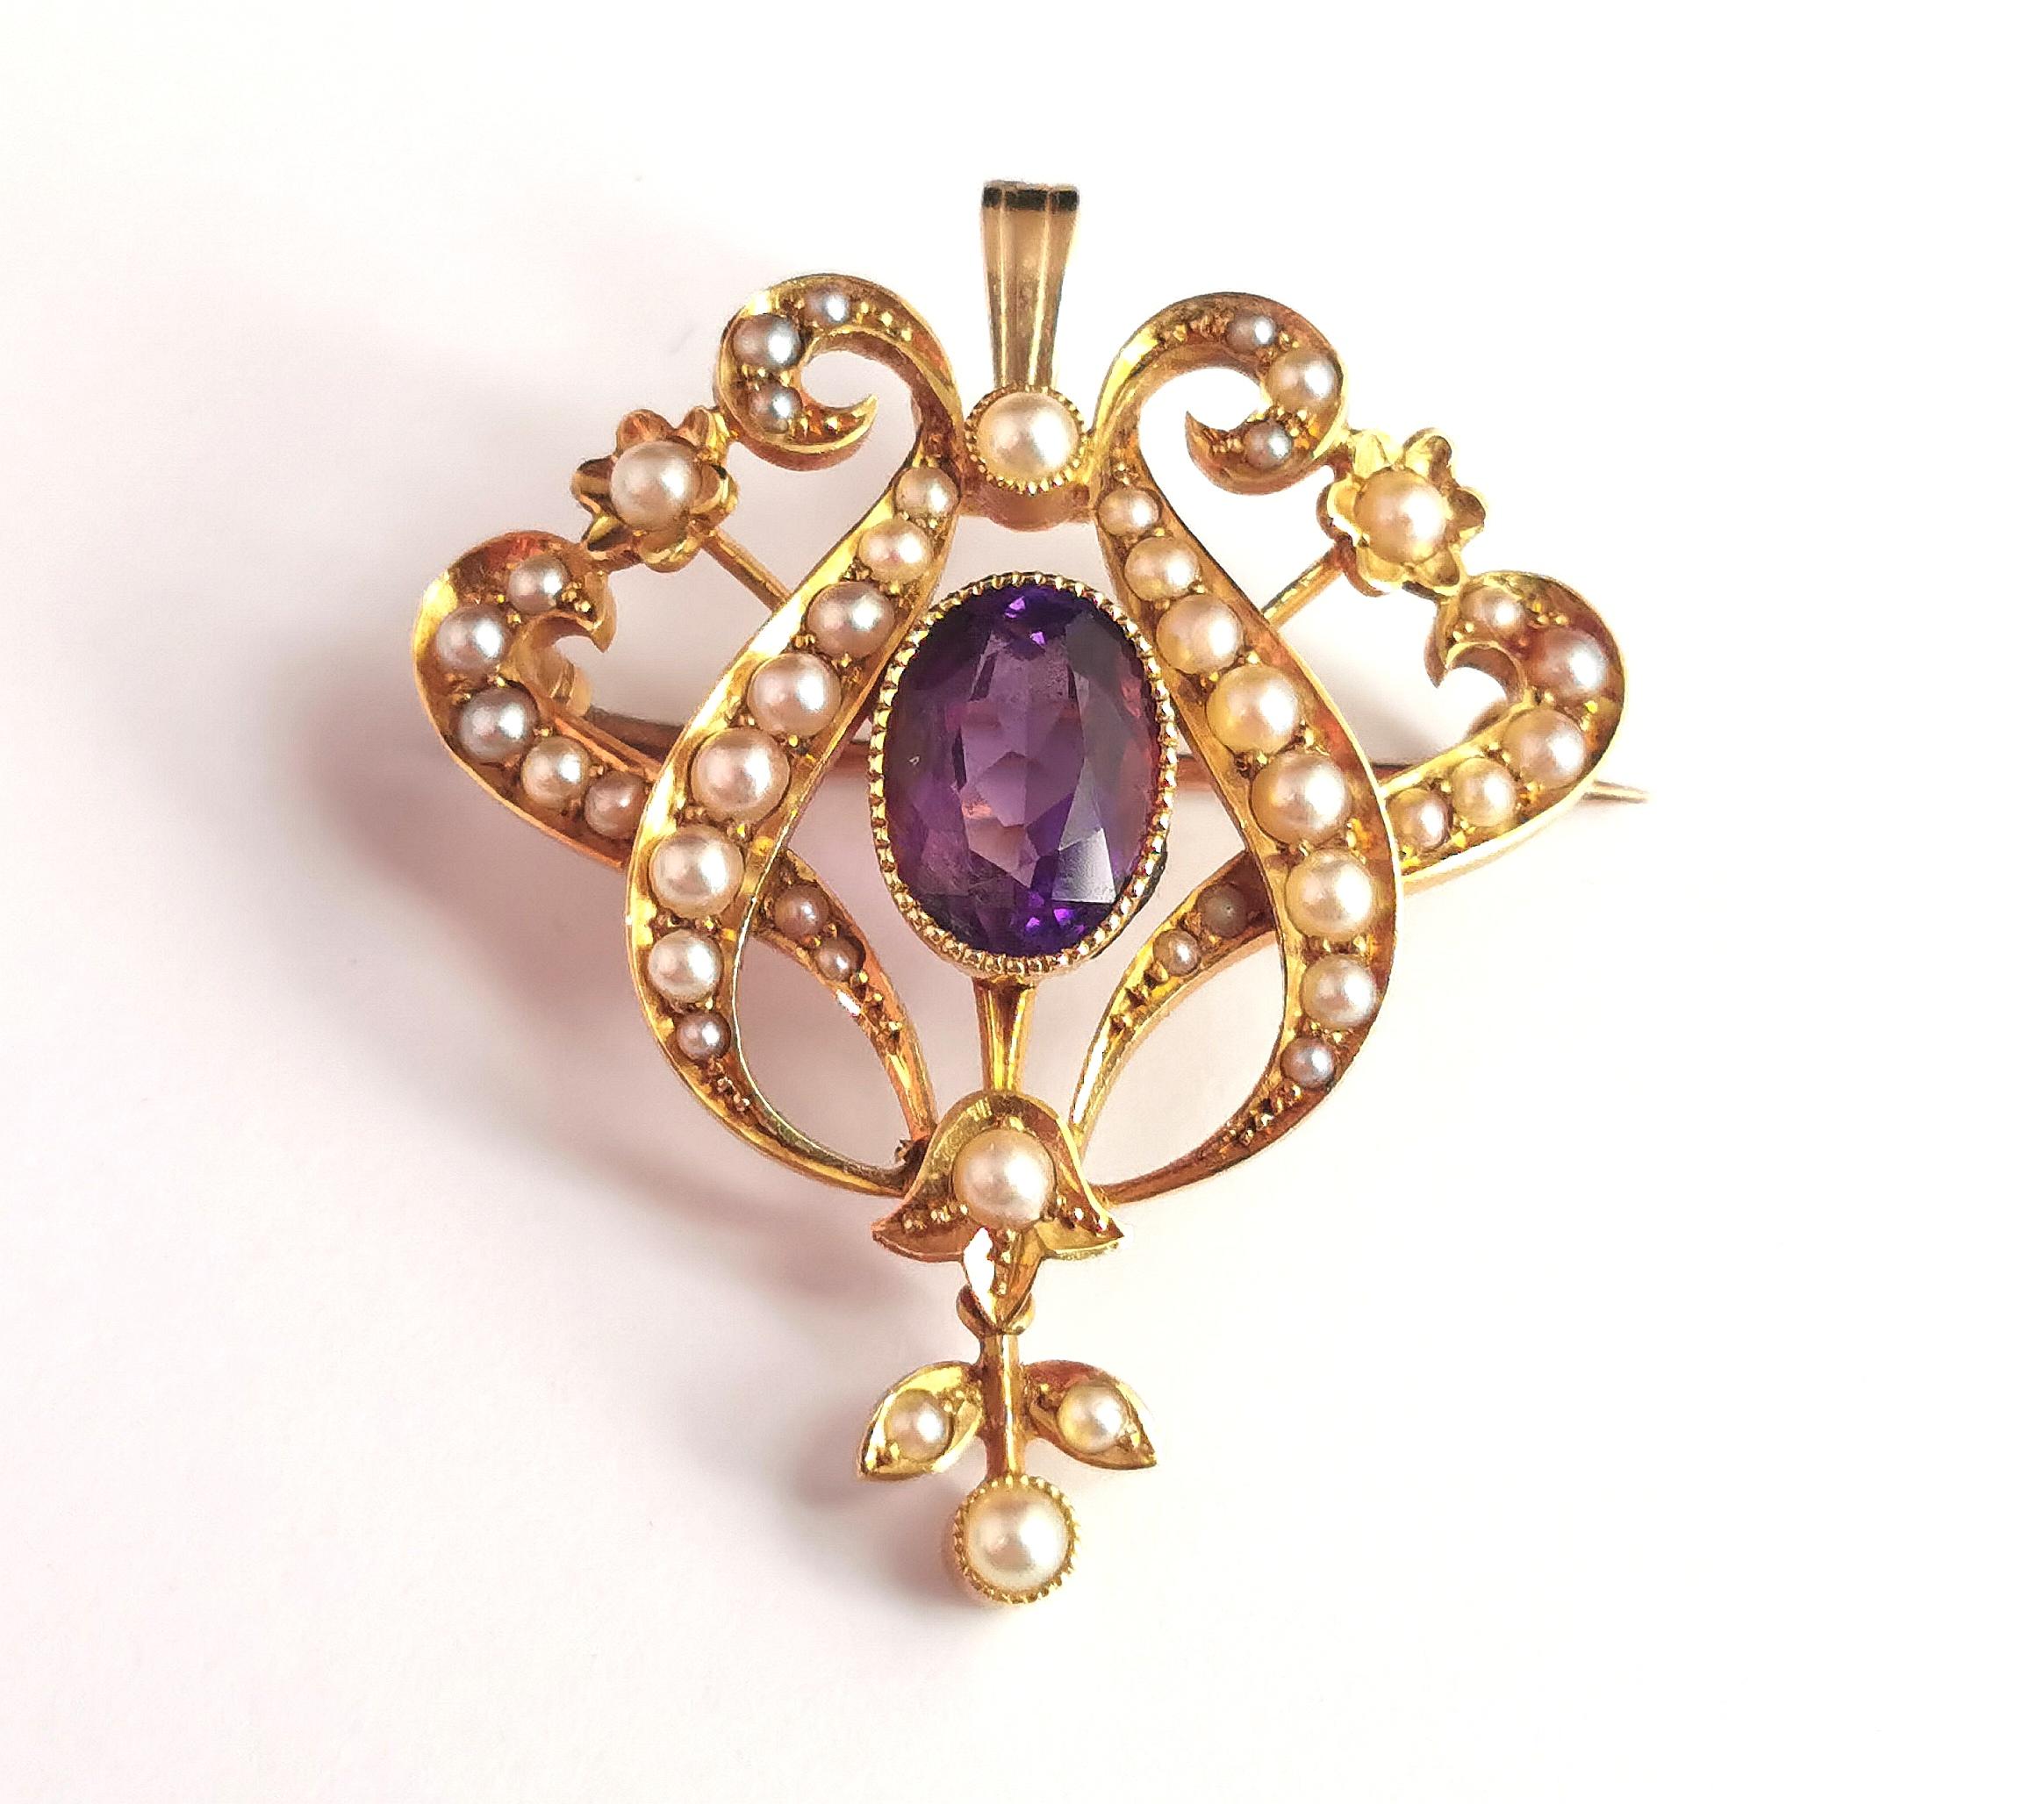 Antique Art Nouveau Amethyst and Pearl Pendant Brooch, 15kt Yellow Gold 12